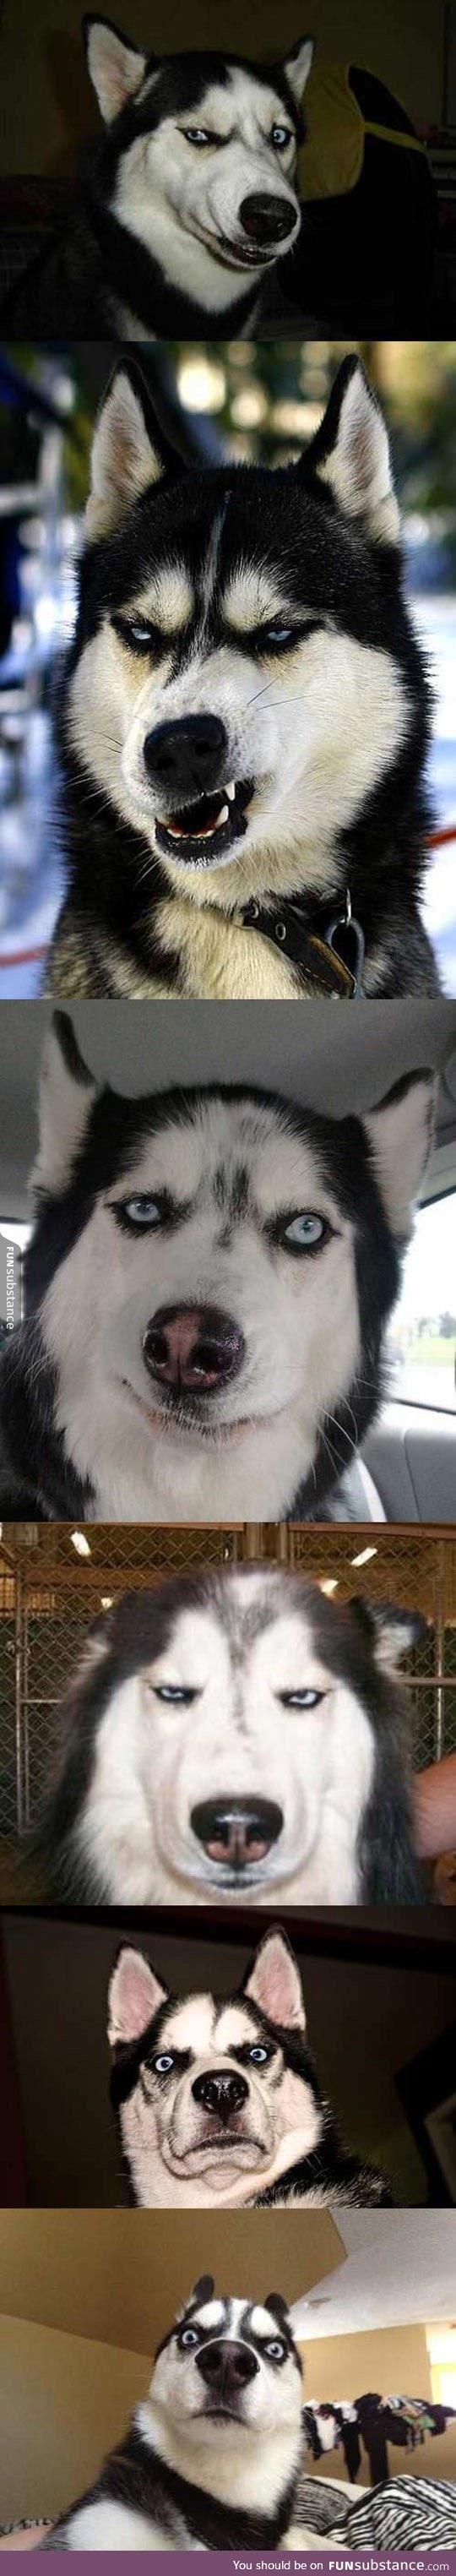 Huskies usually make the best faces